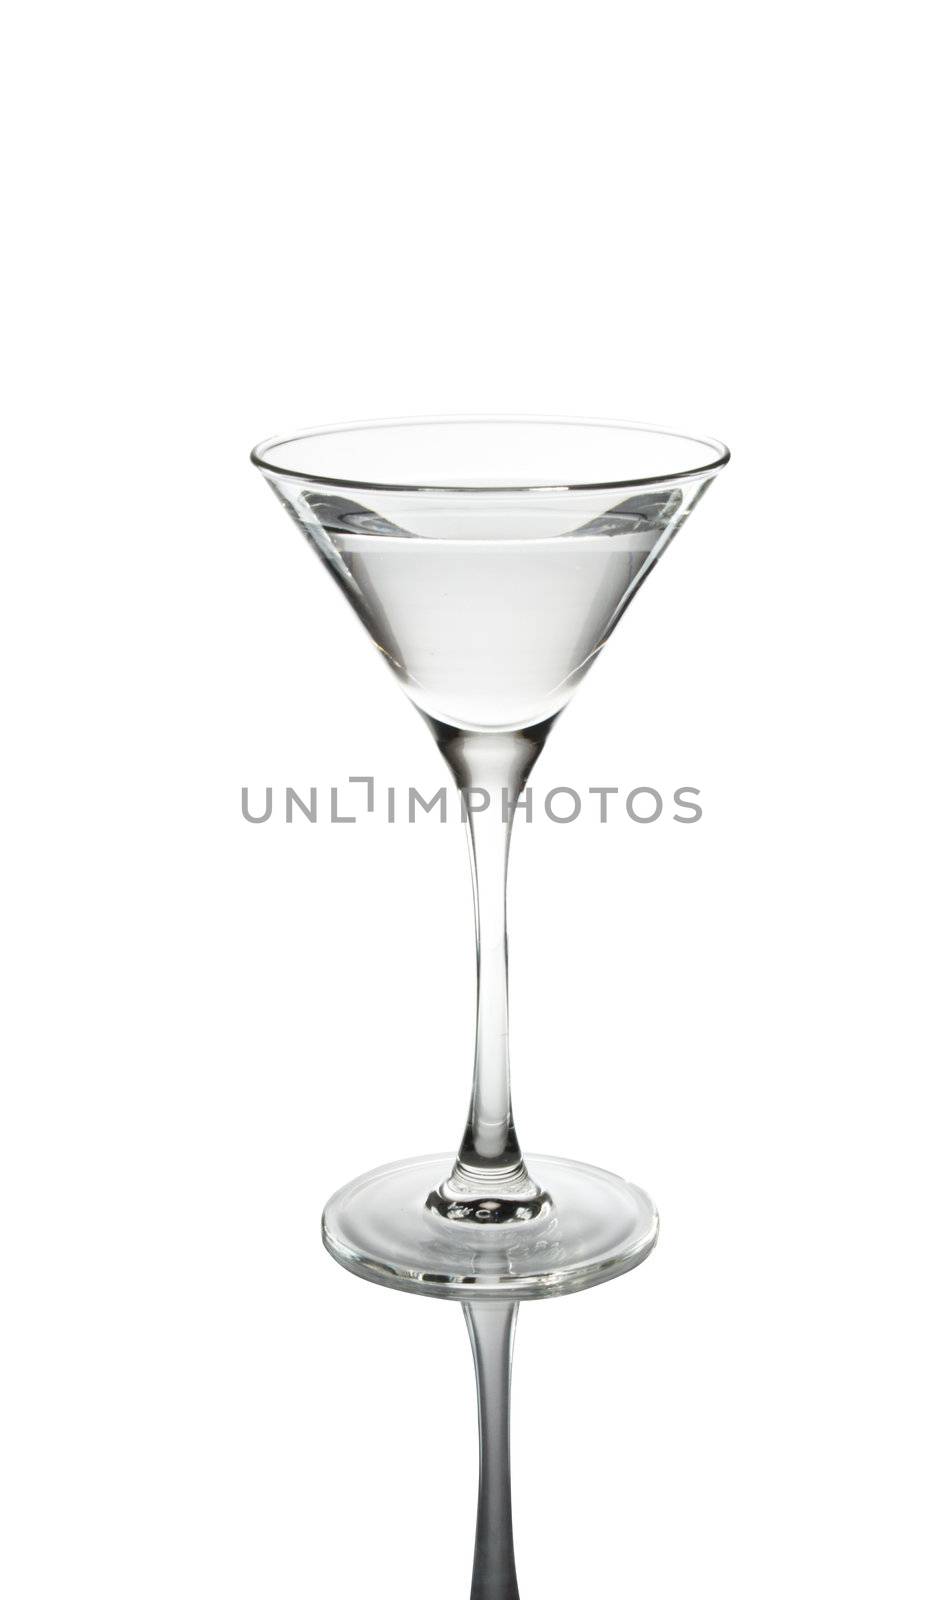 Glass of martini with reflexion on a white background
